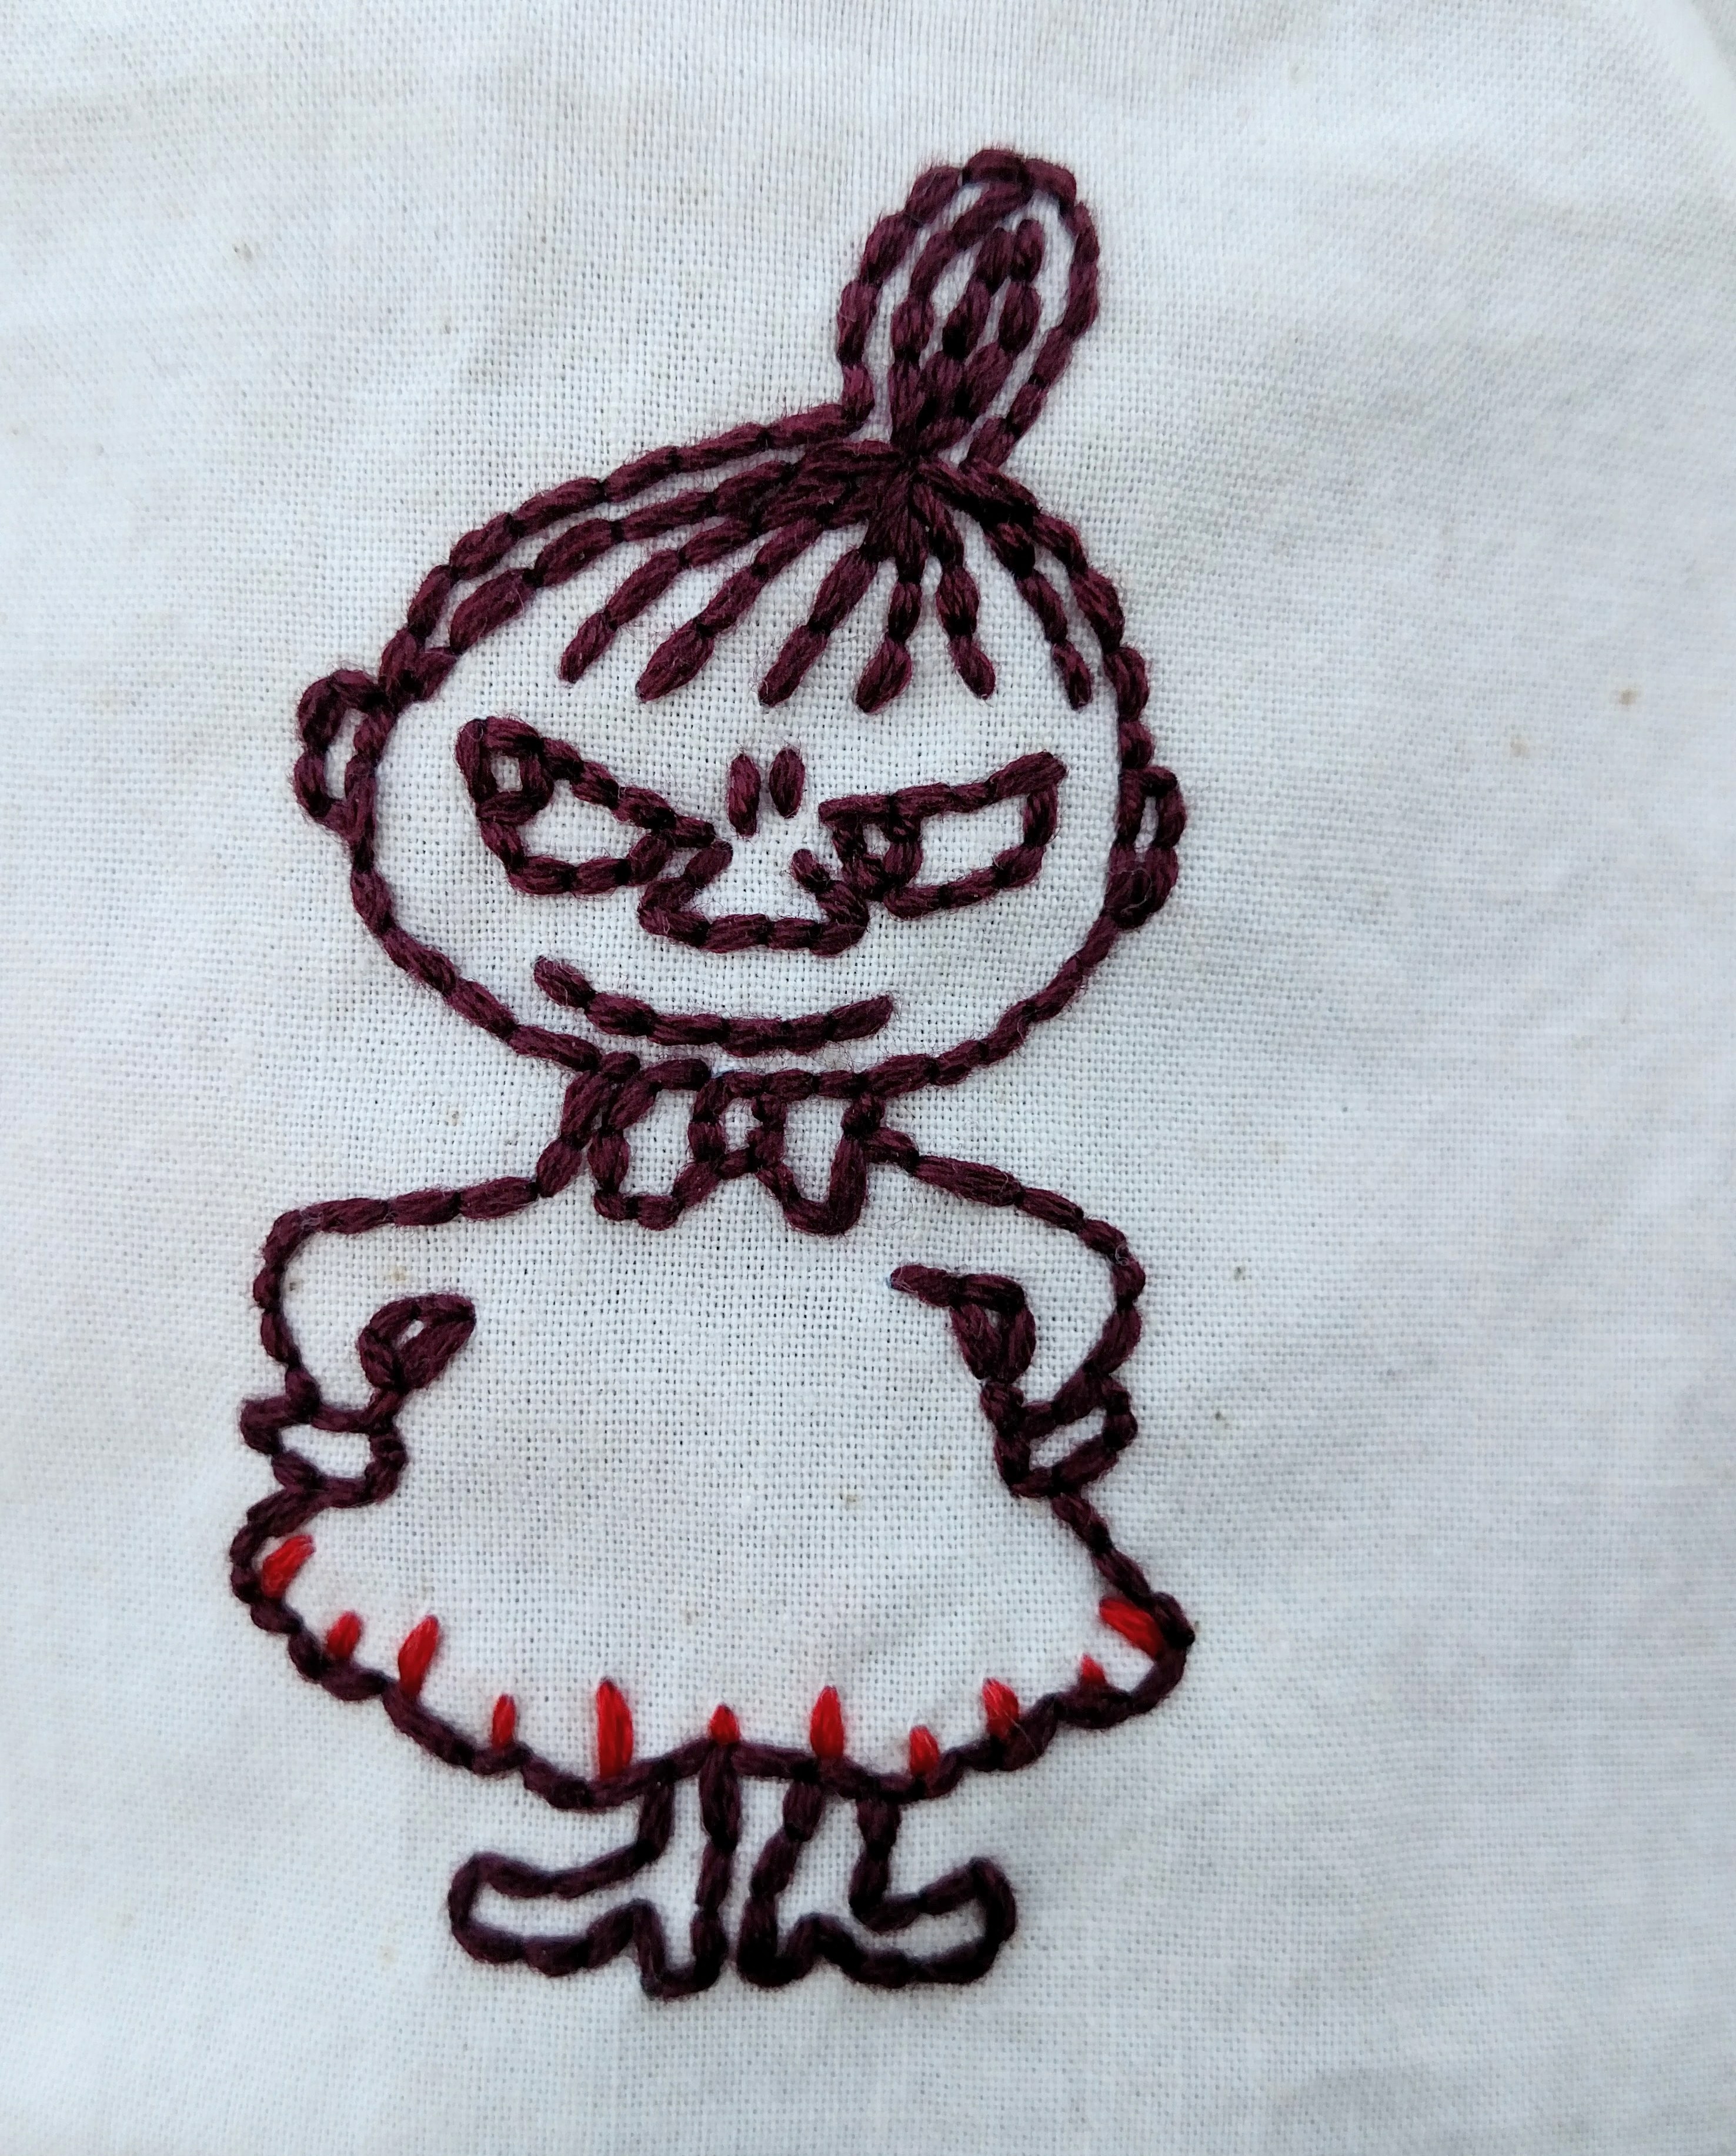 Little My has her hands on her hips and a devious little smirk on her face. She is embroidered in outline, and has little red stitches accentuating the hem of her dress.